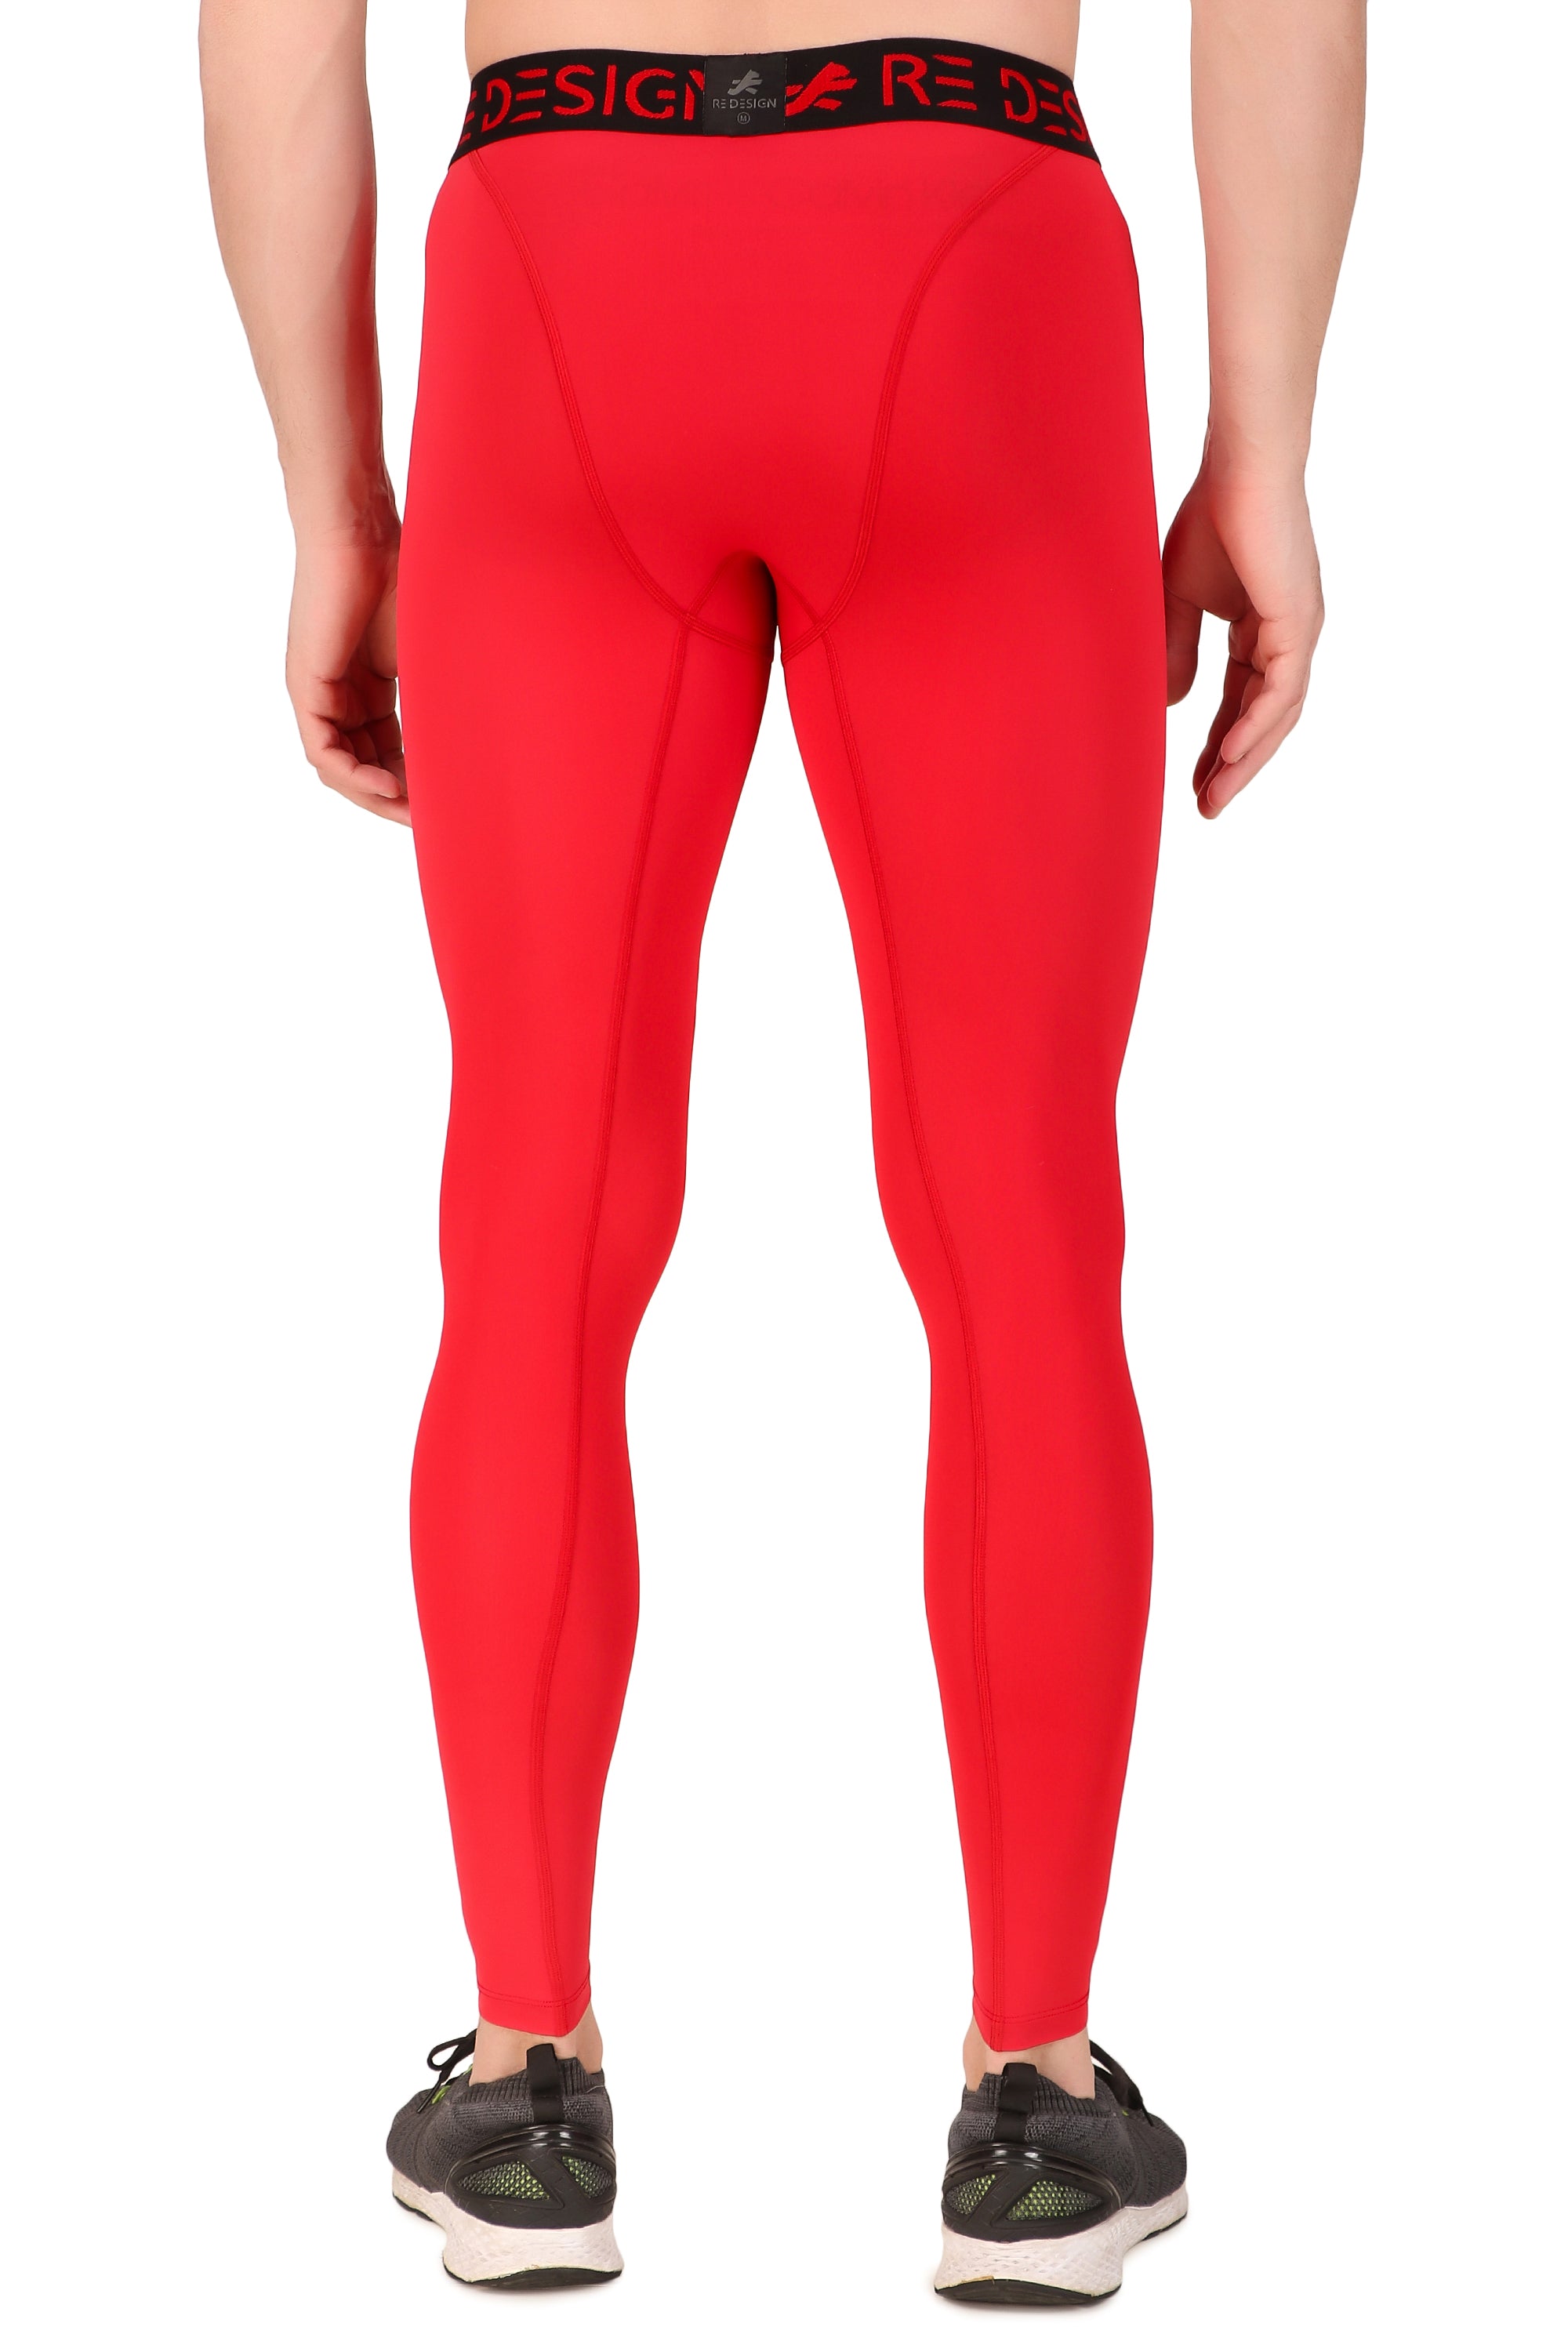 WOMEN'S NEW SERIES - SKINS Compression UK